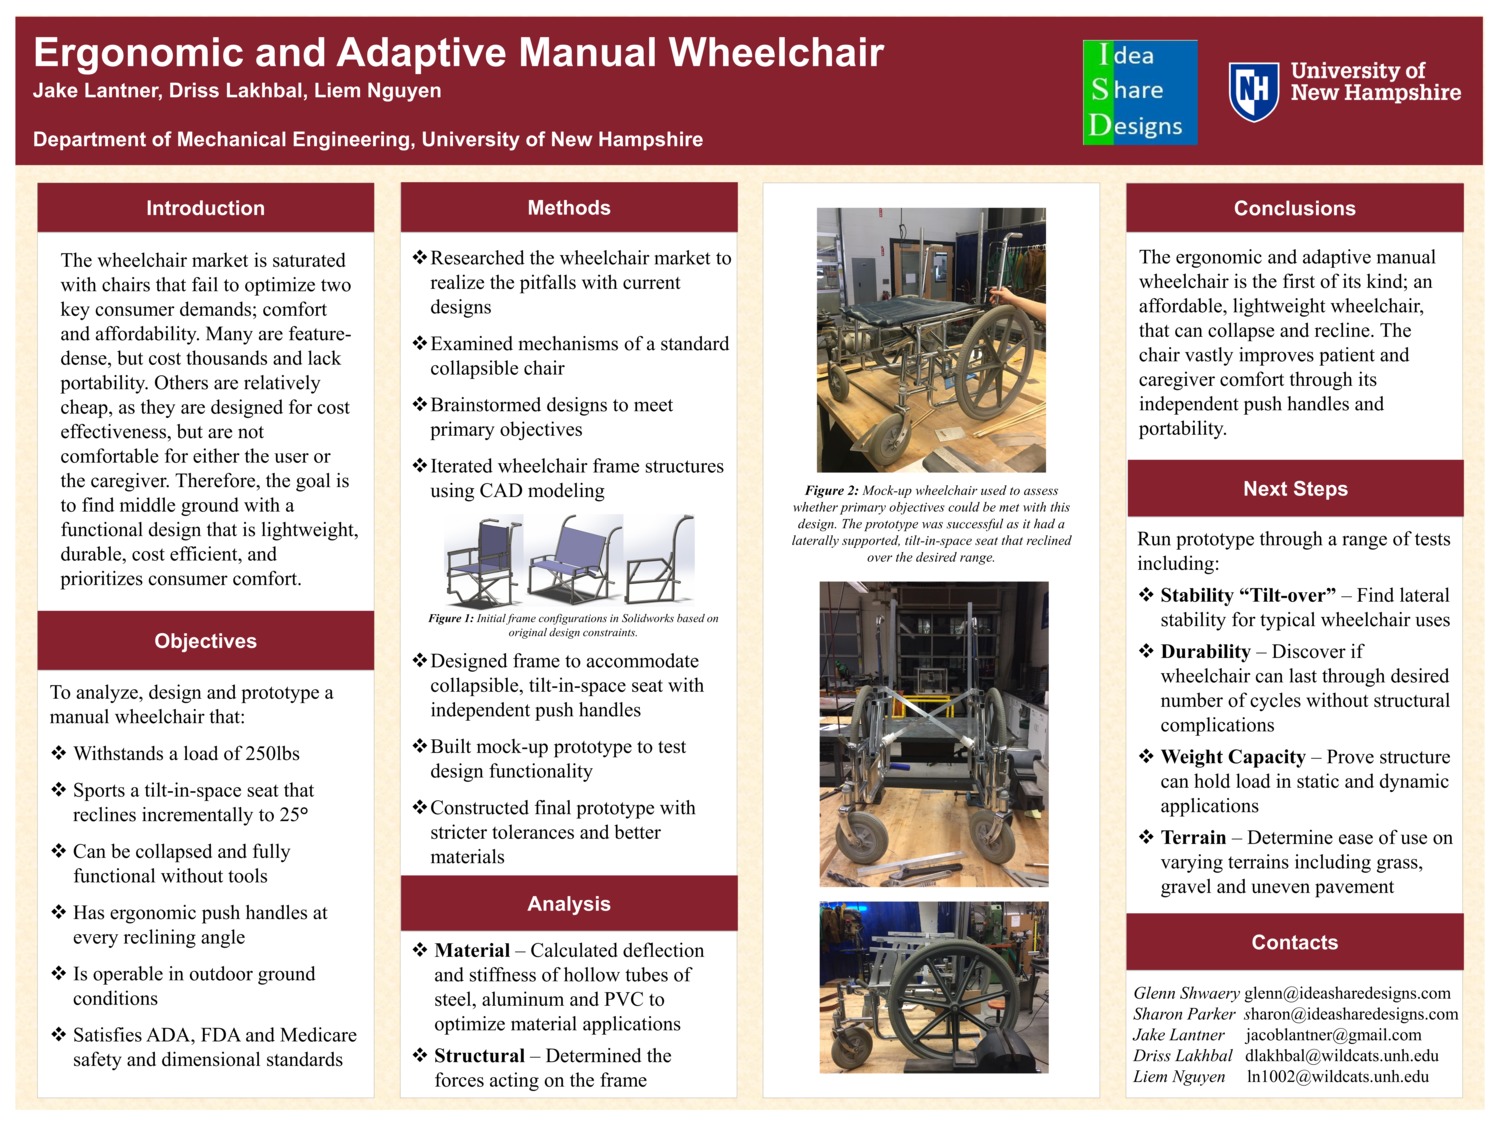 Ergonomic And Adaptive Manual Wheelchair by jel1004